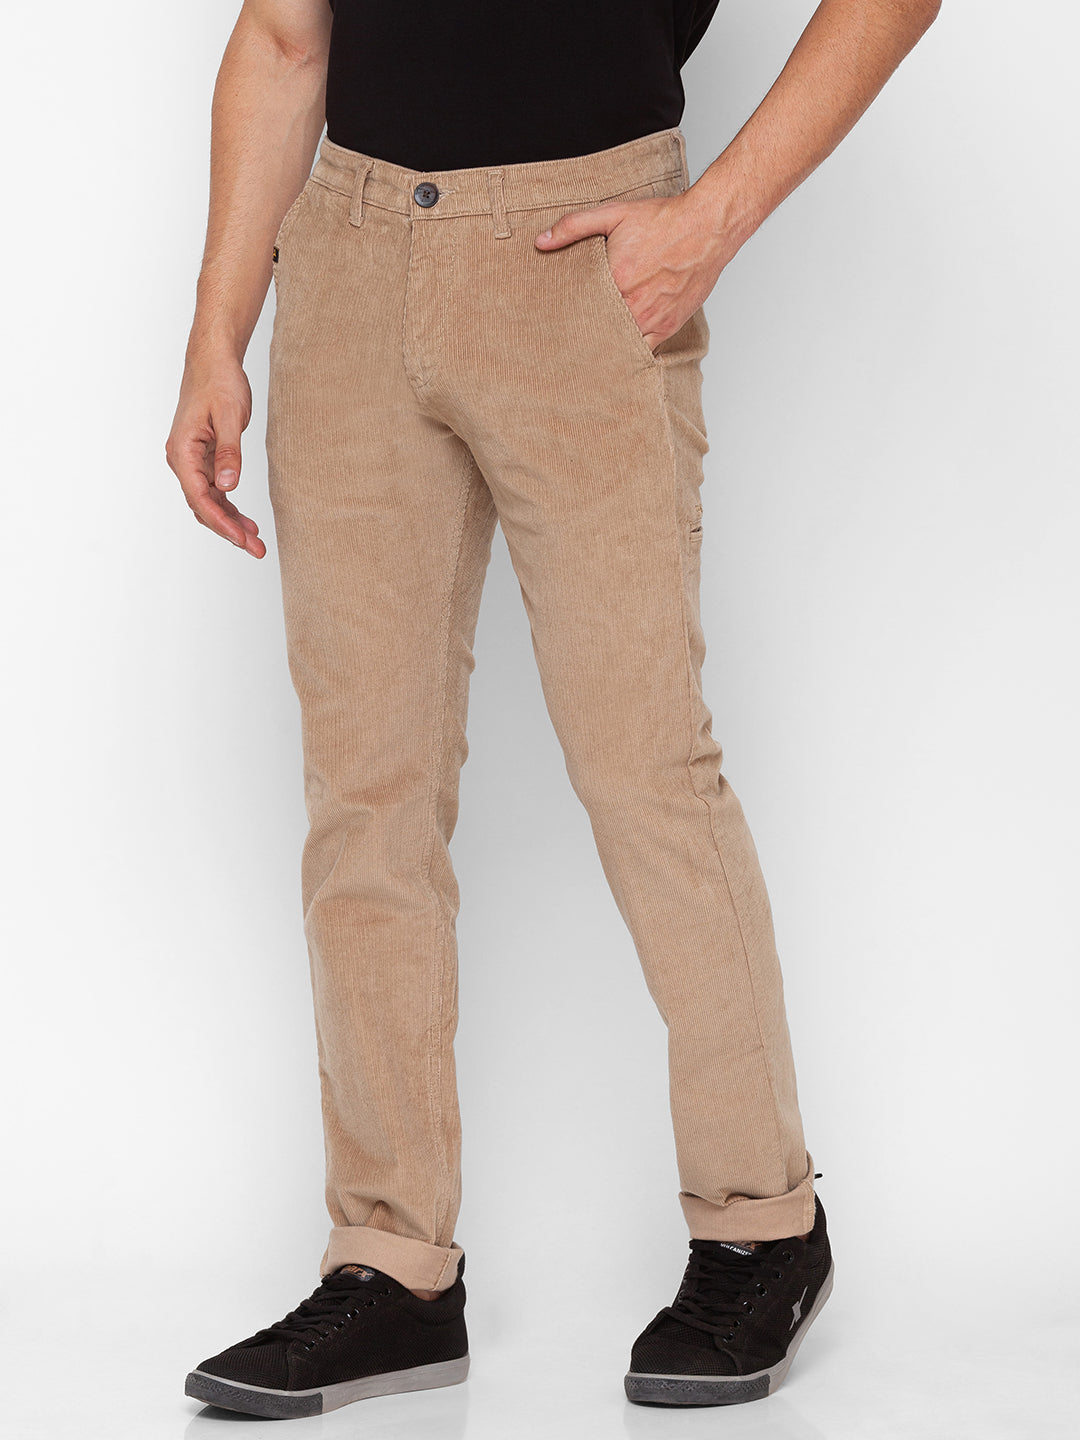 Khaki Trousers  Buy Khaki Trousers Online in India at Best Price